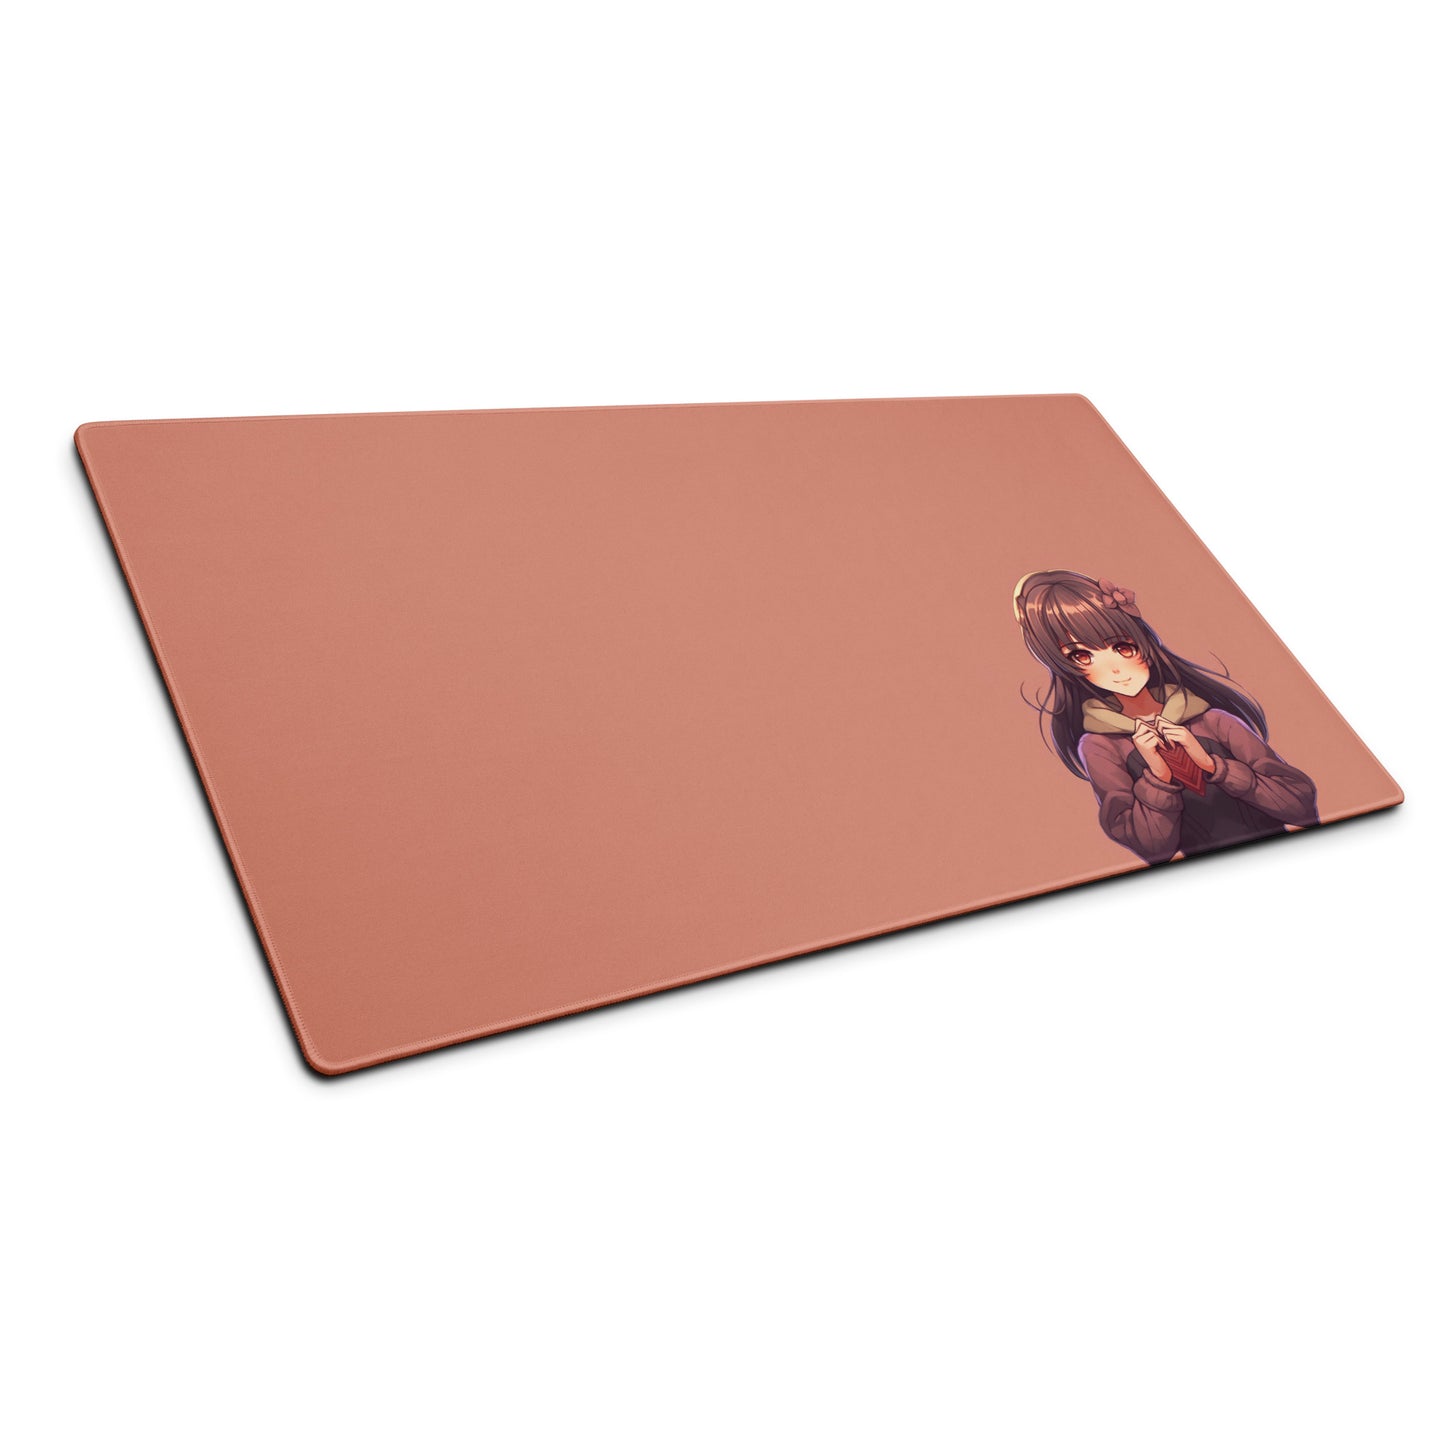 A 36" x 18" gaming desk pad with a blushing anime girl on a rose gold background sitting at an angle.